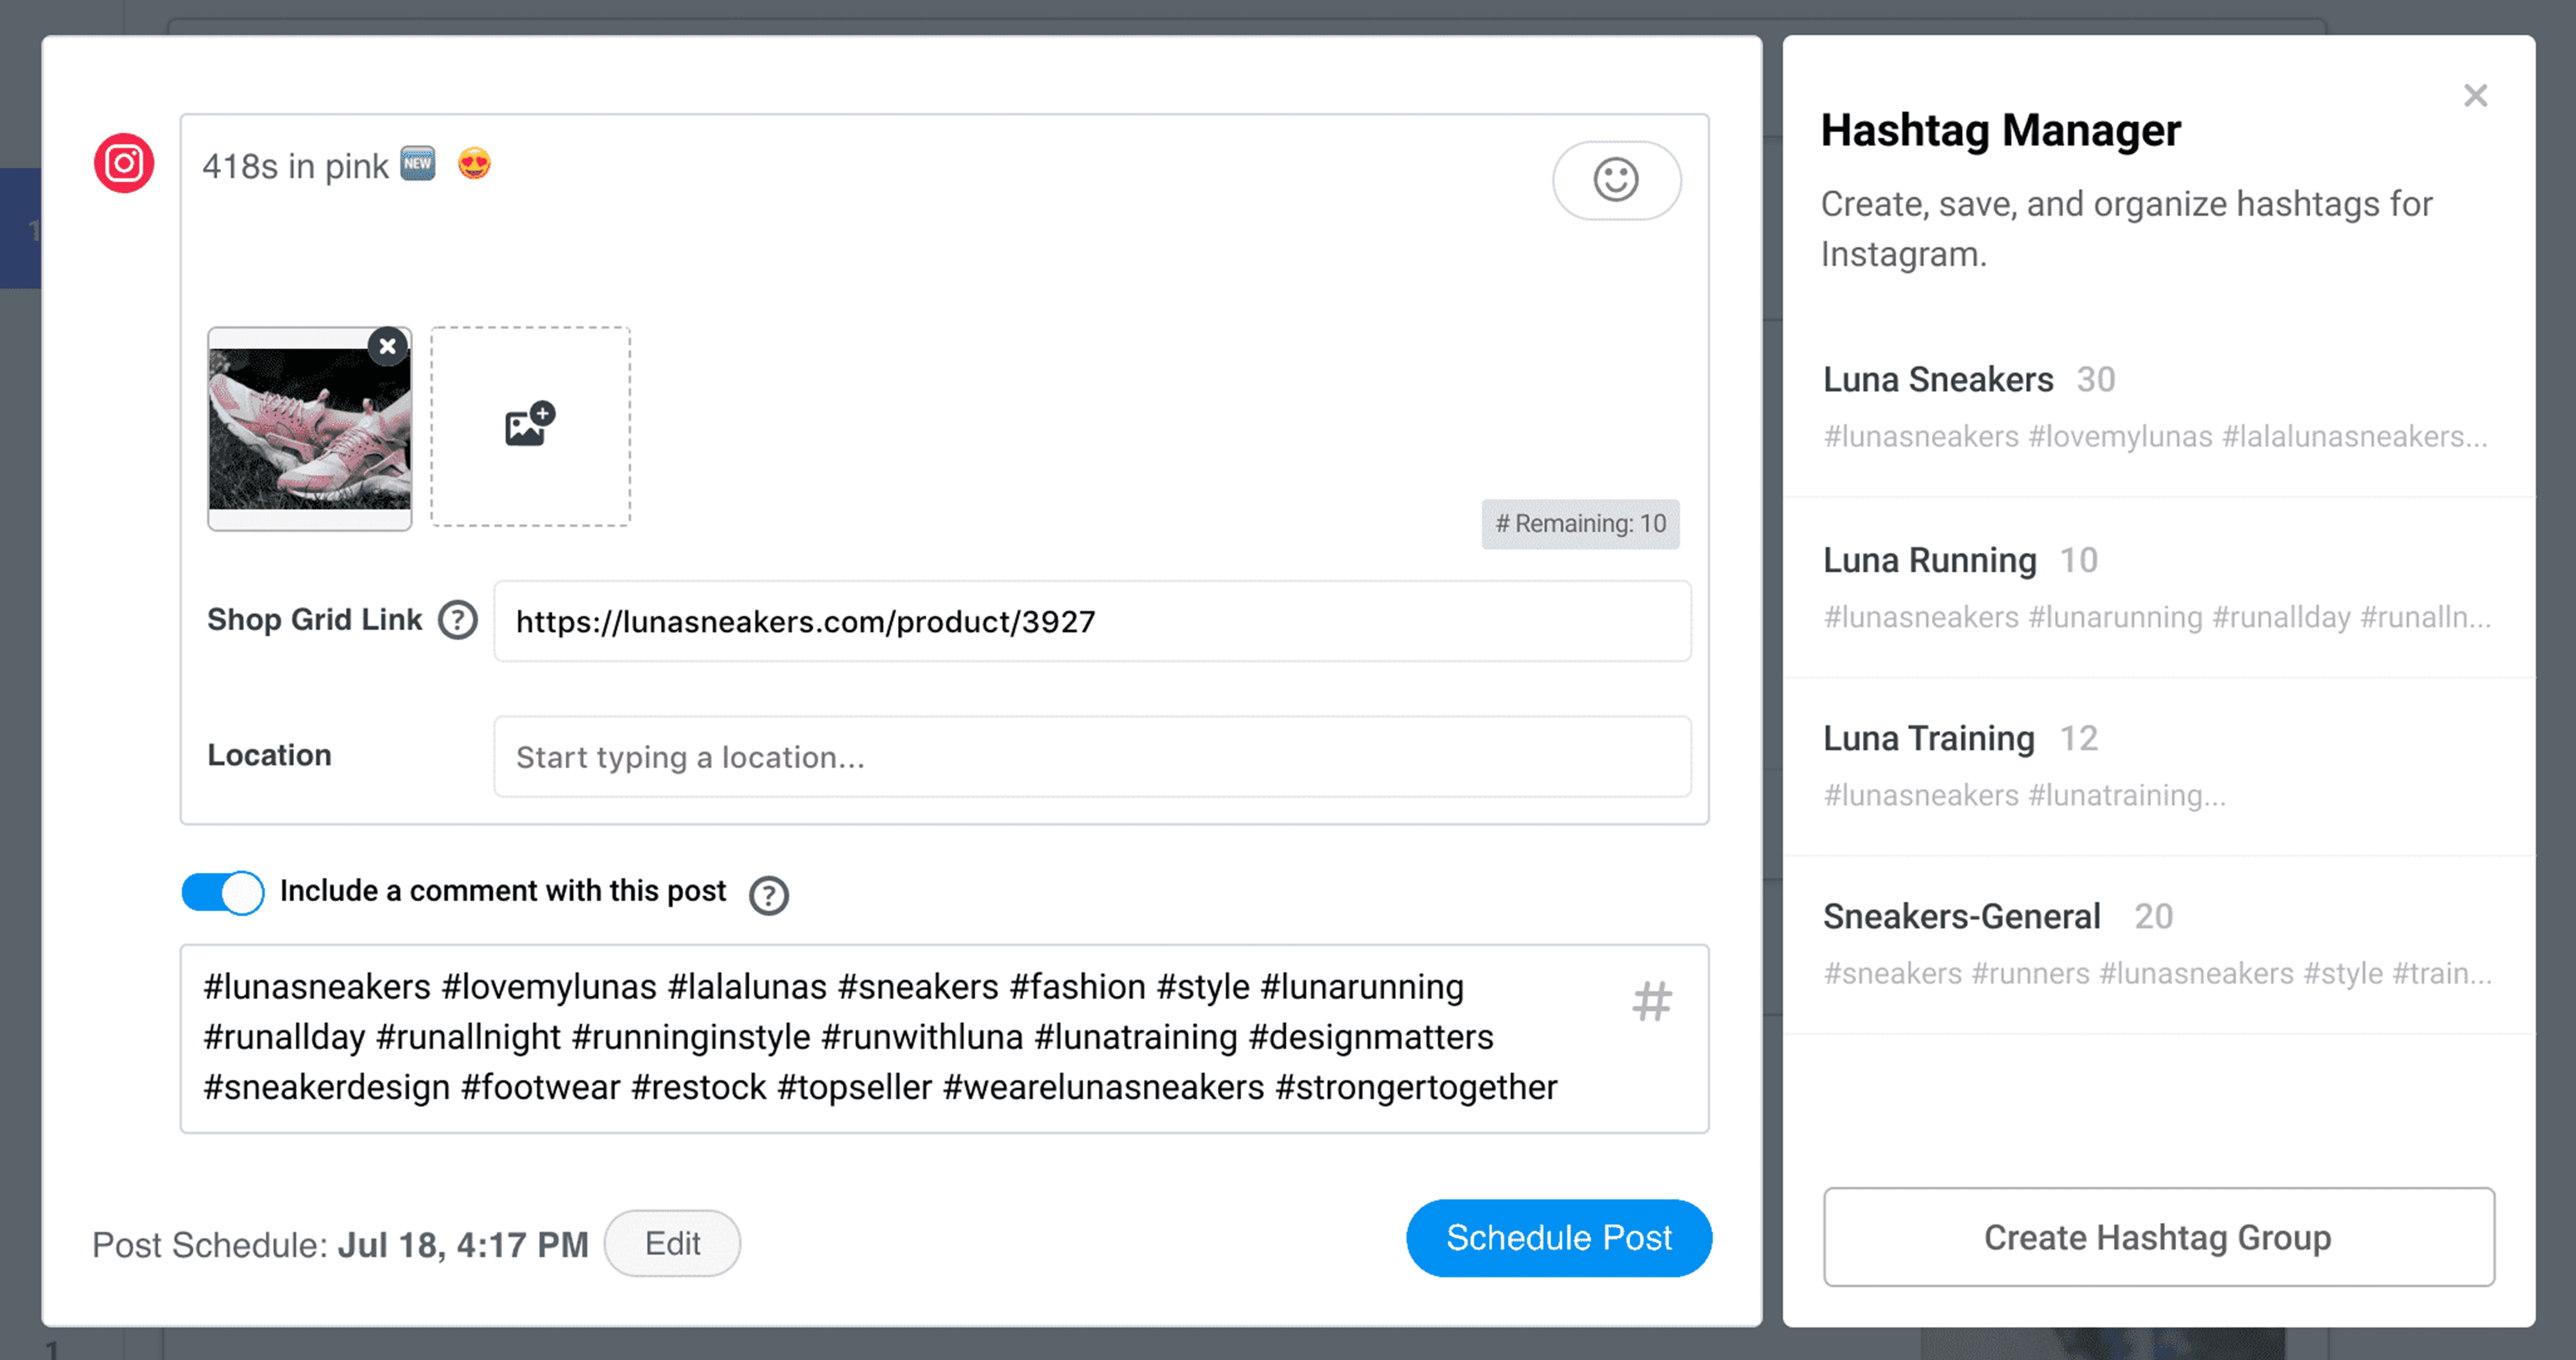 Announcing Hashtag Manager: A New Tool to Help You Save and